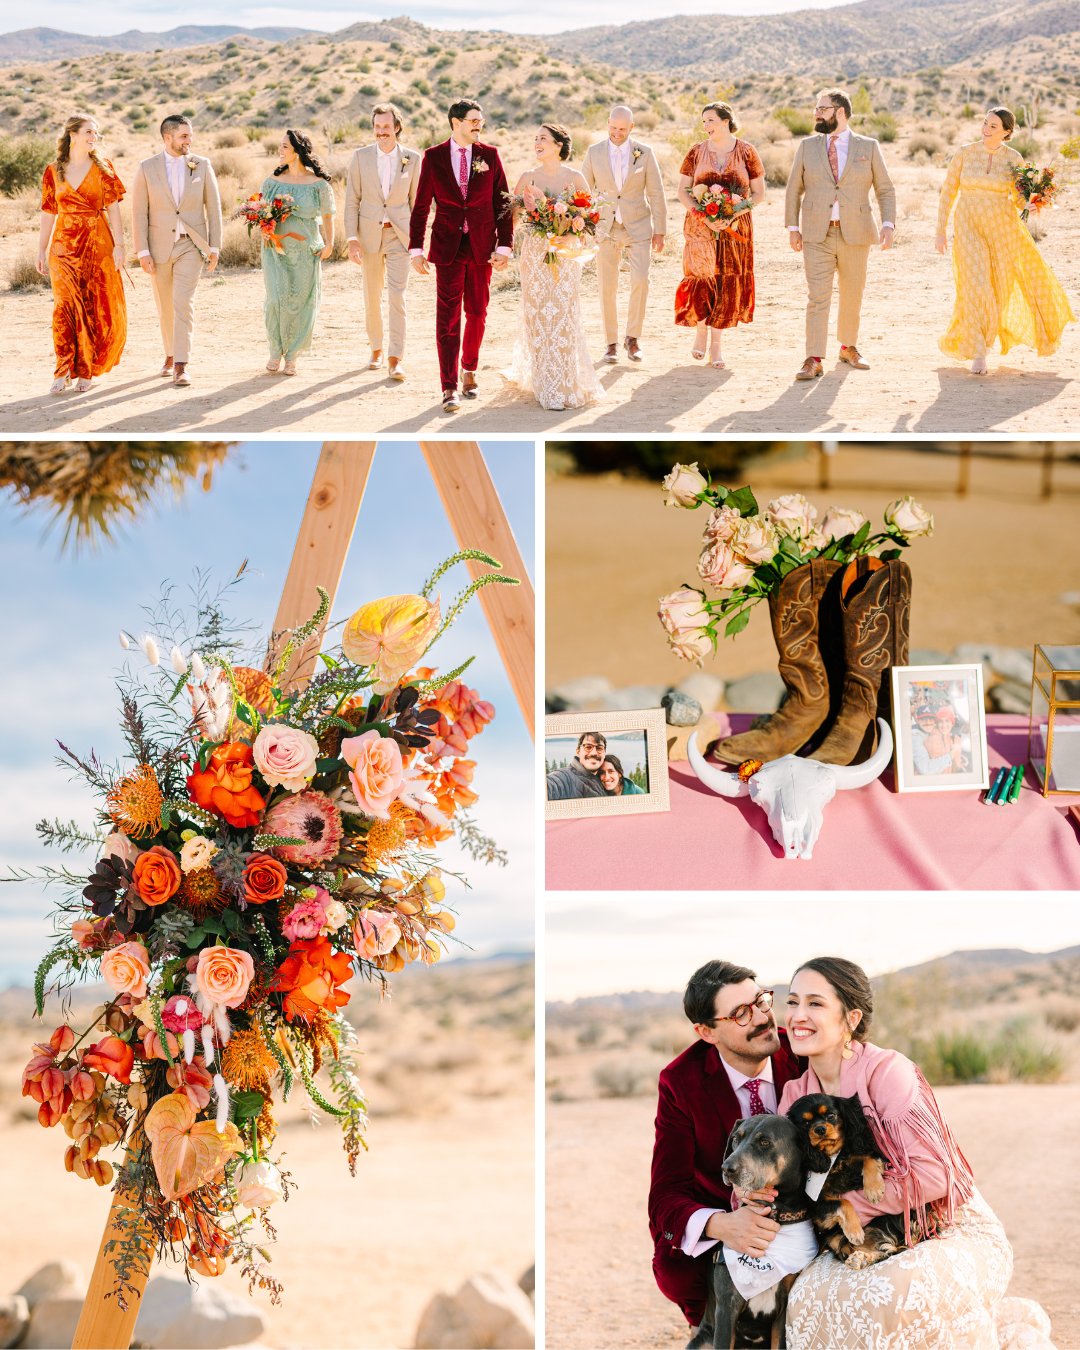 bride, groom and wedding party surrounded by unique desert flora and fauna